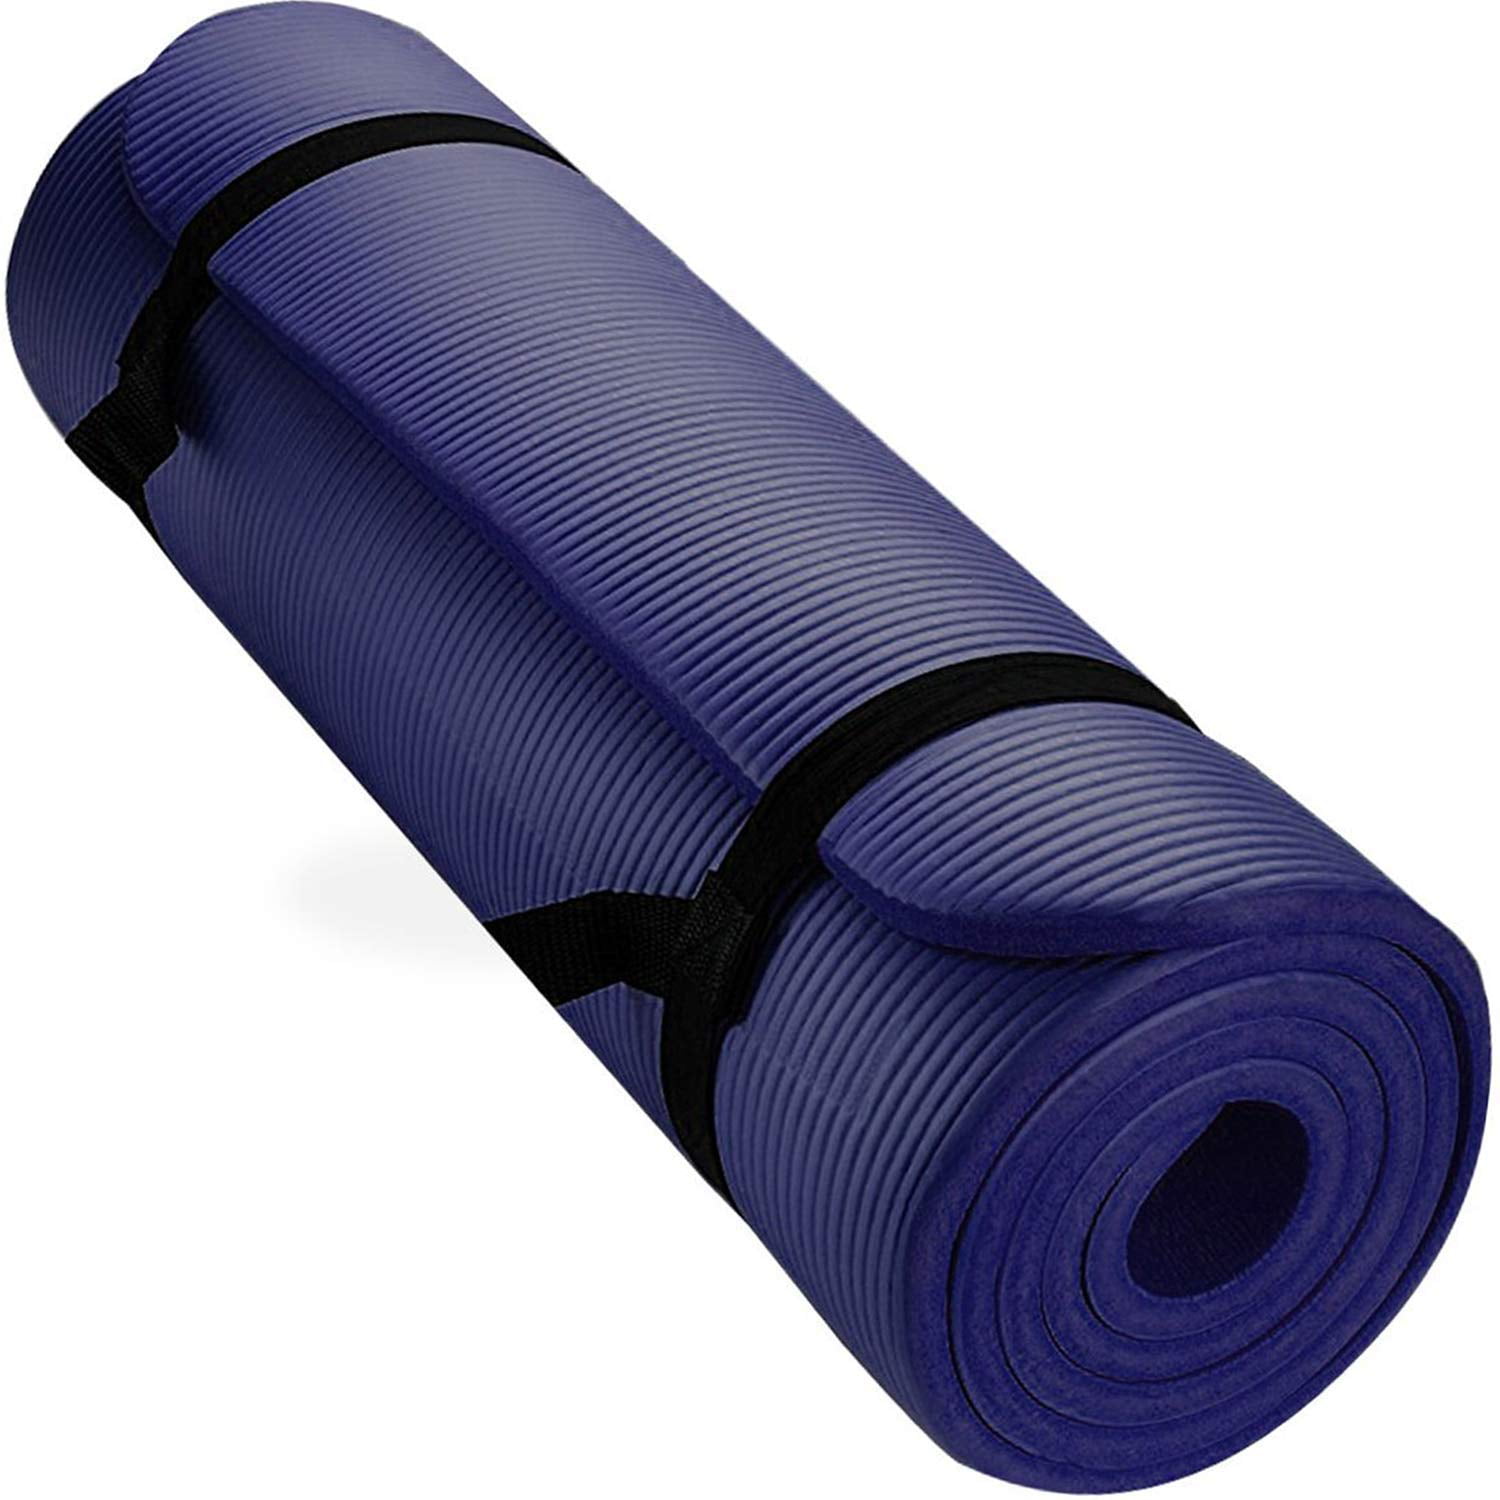 2 inch exercise mat